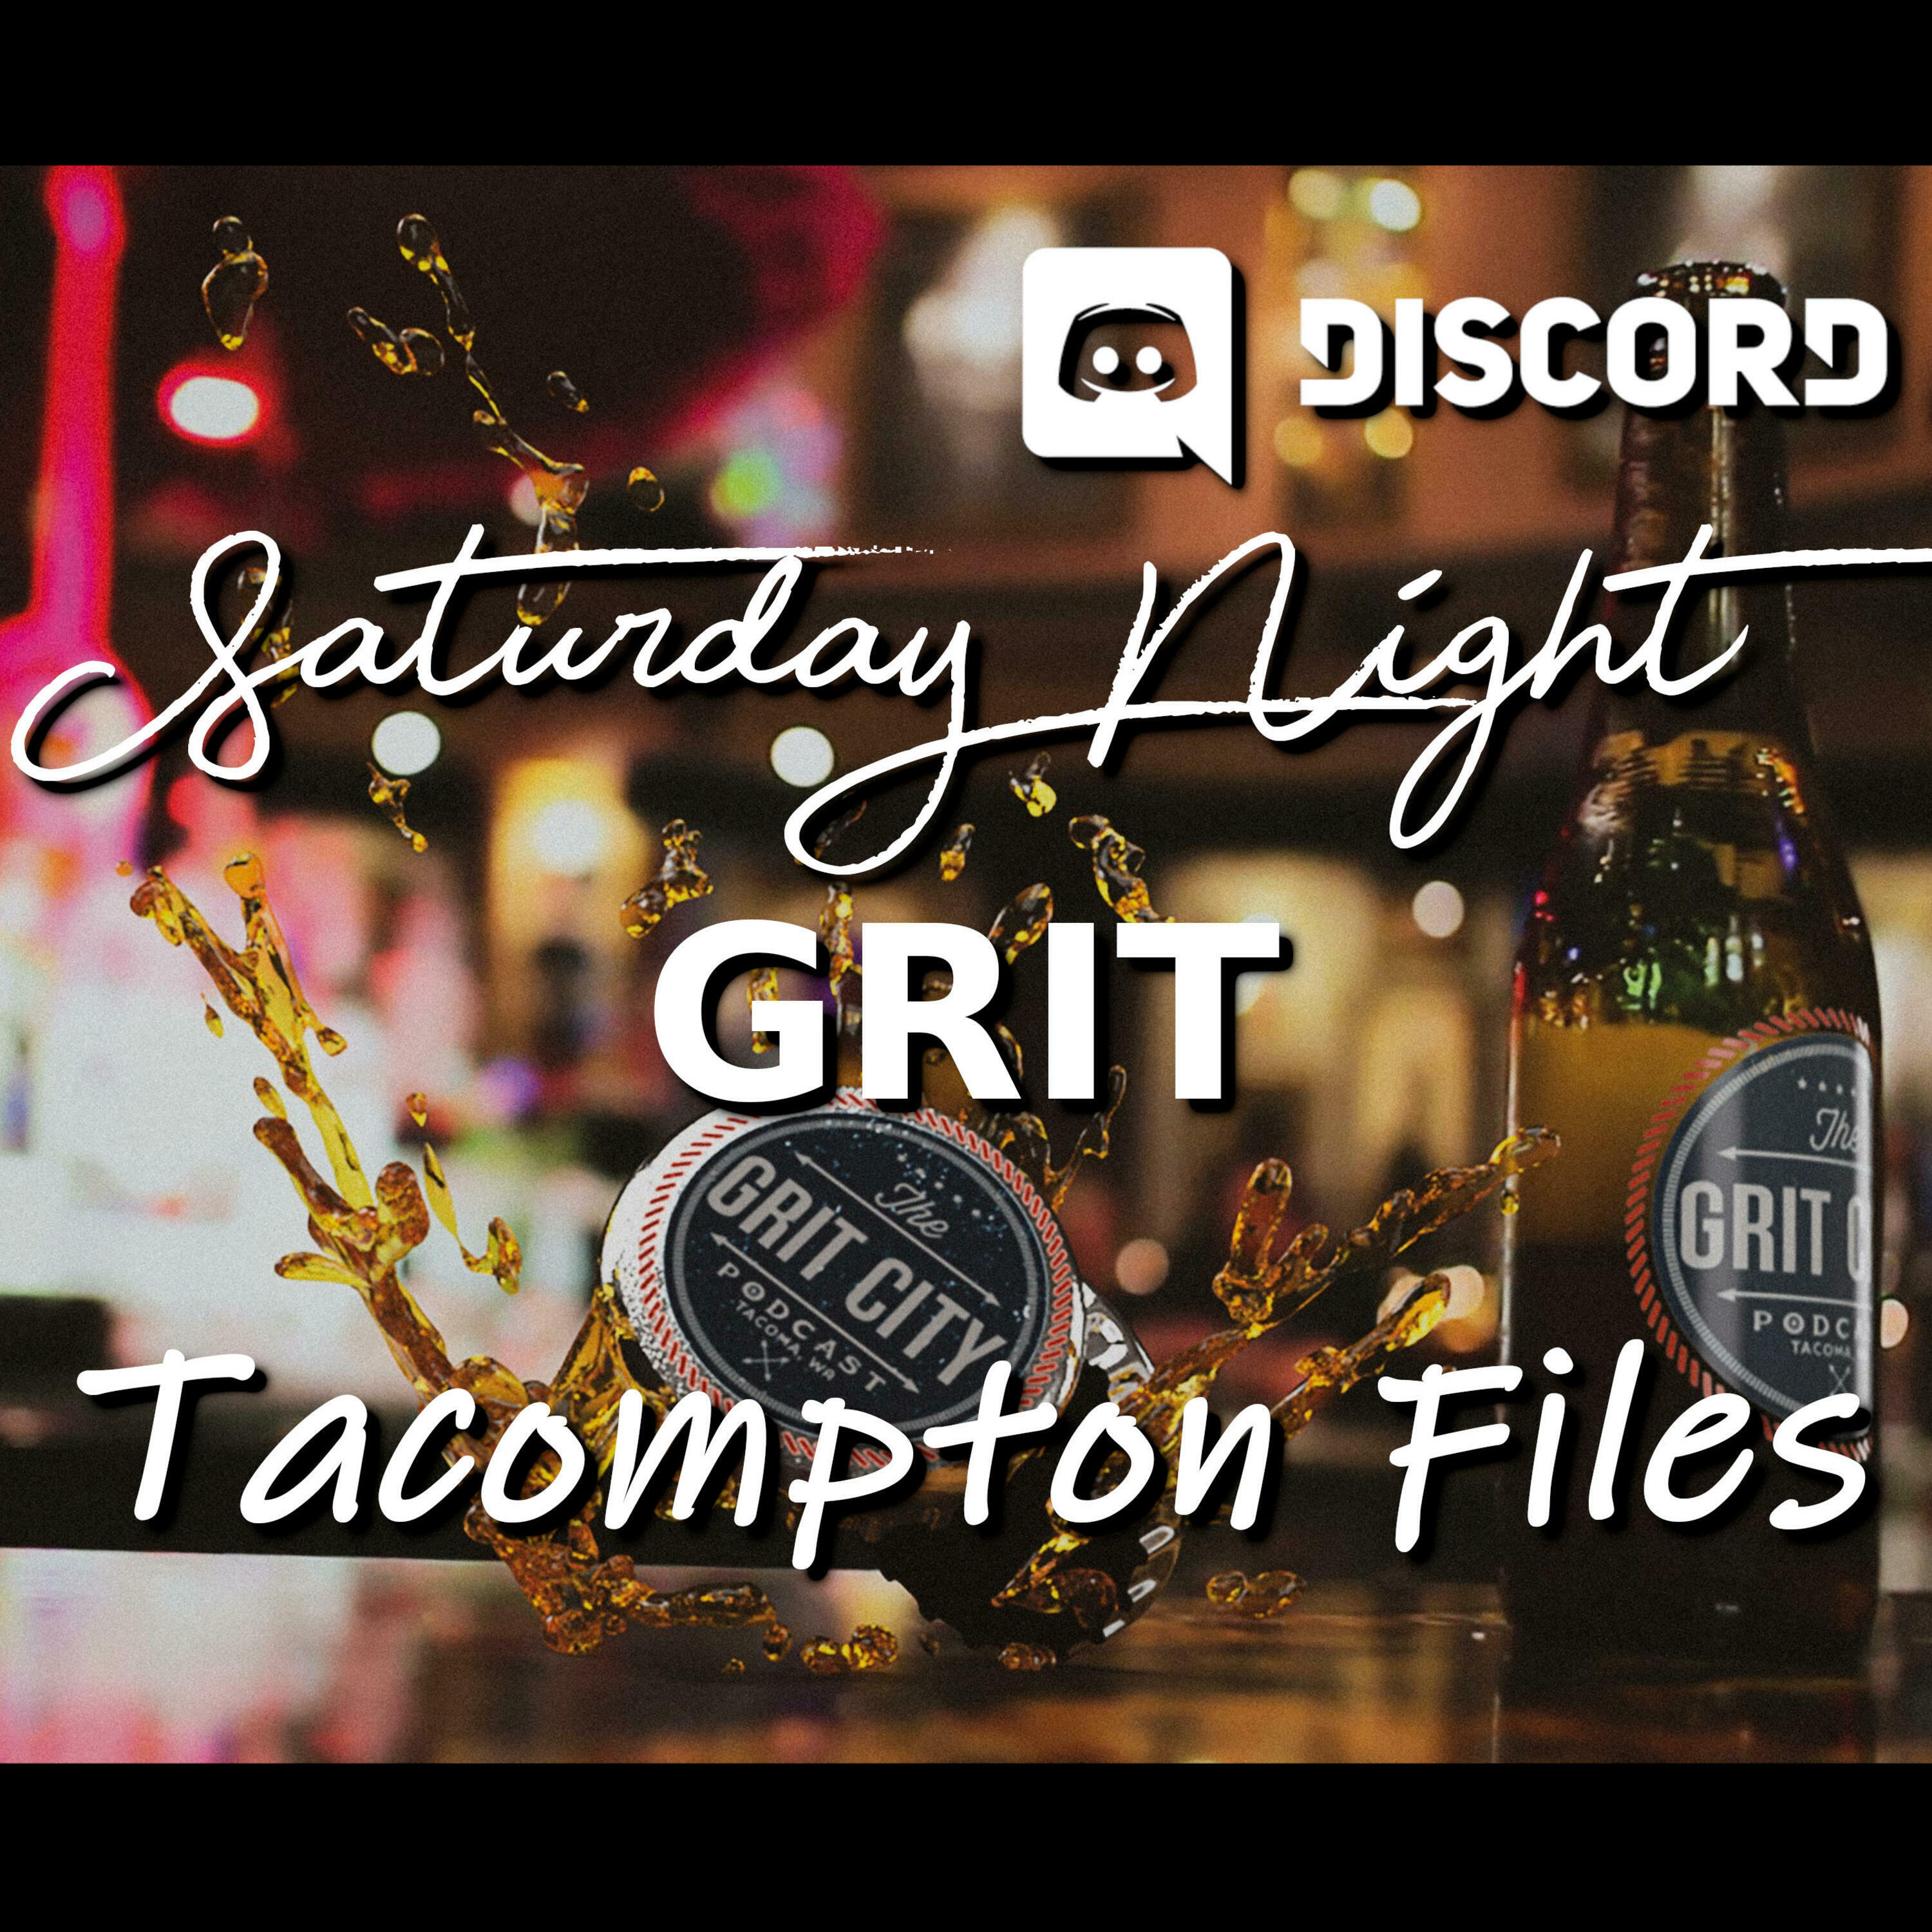 Saturday Night Grit with Tacompton Files